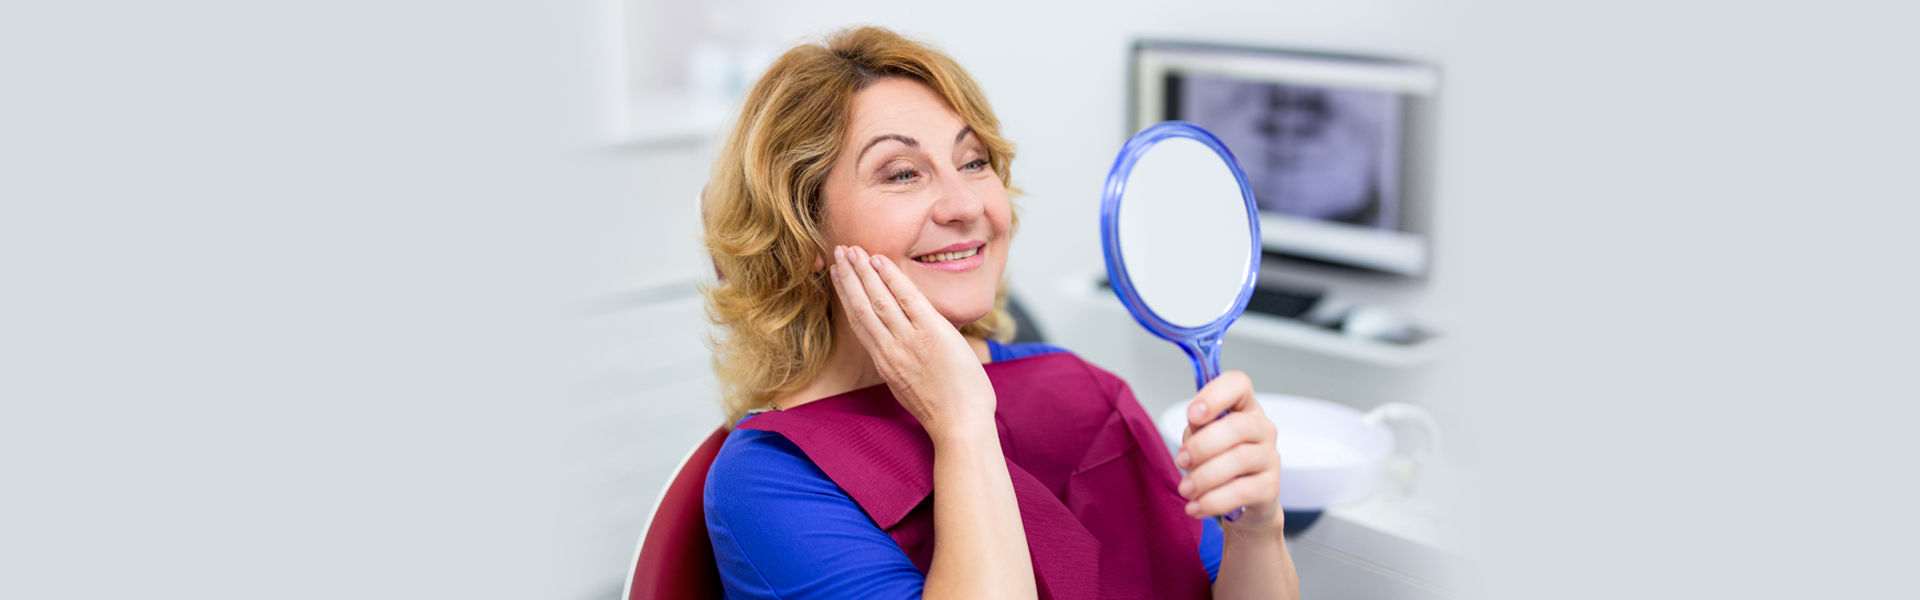 A Crucial Part of Preventive Healthcare Is Dental Exams and Cleanings